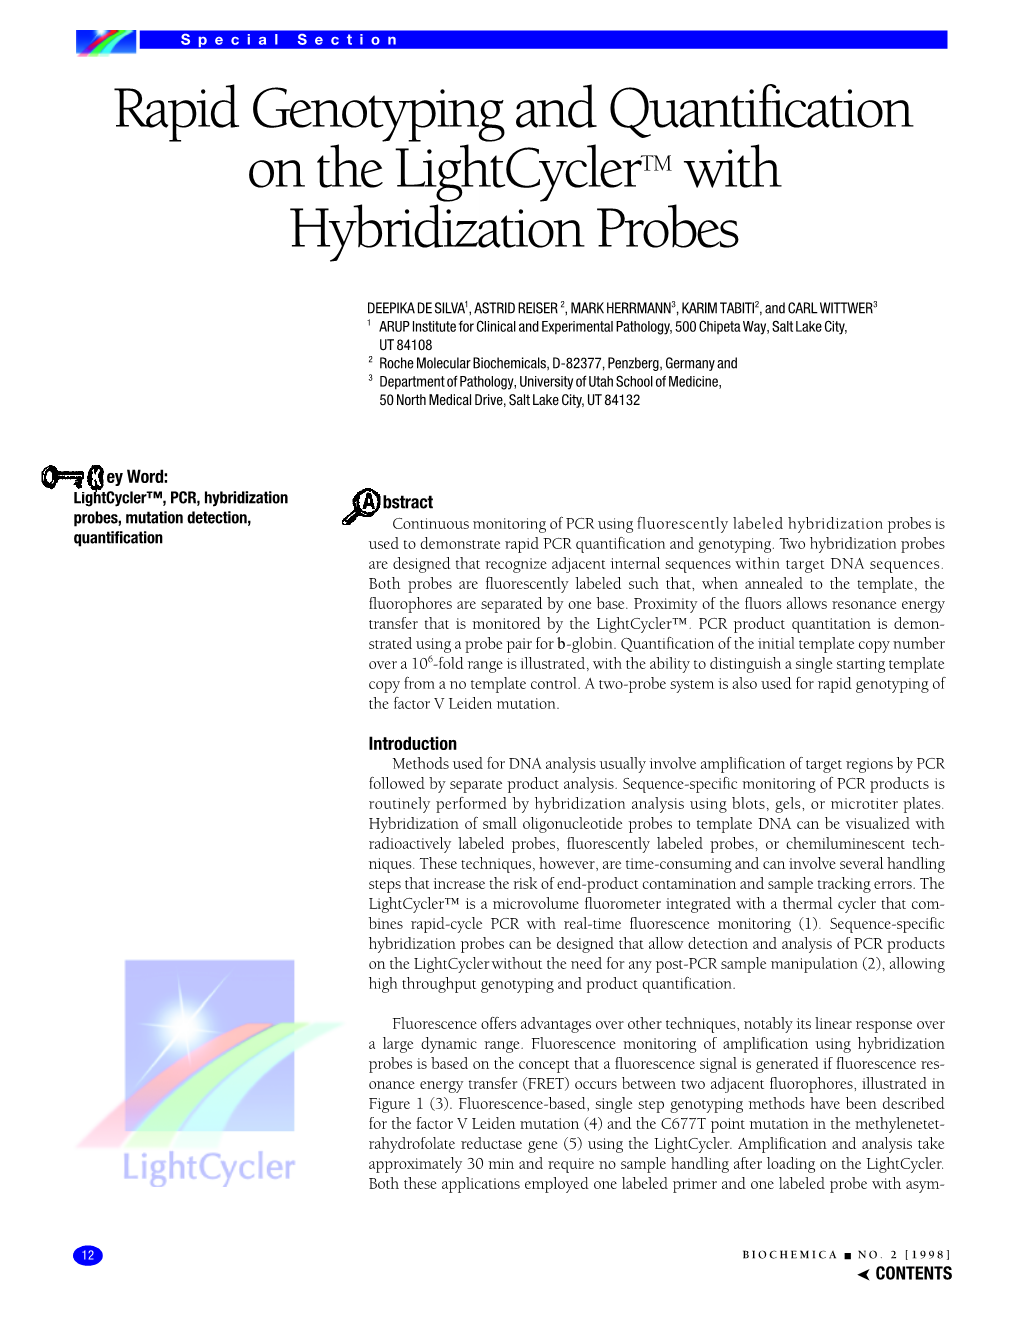 With Hybridization Probes